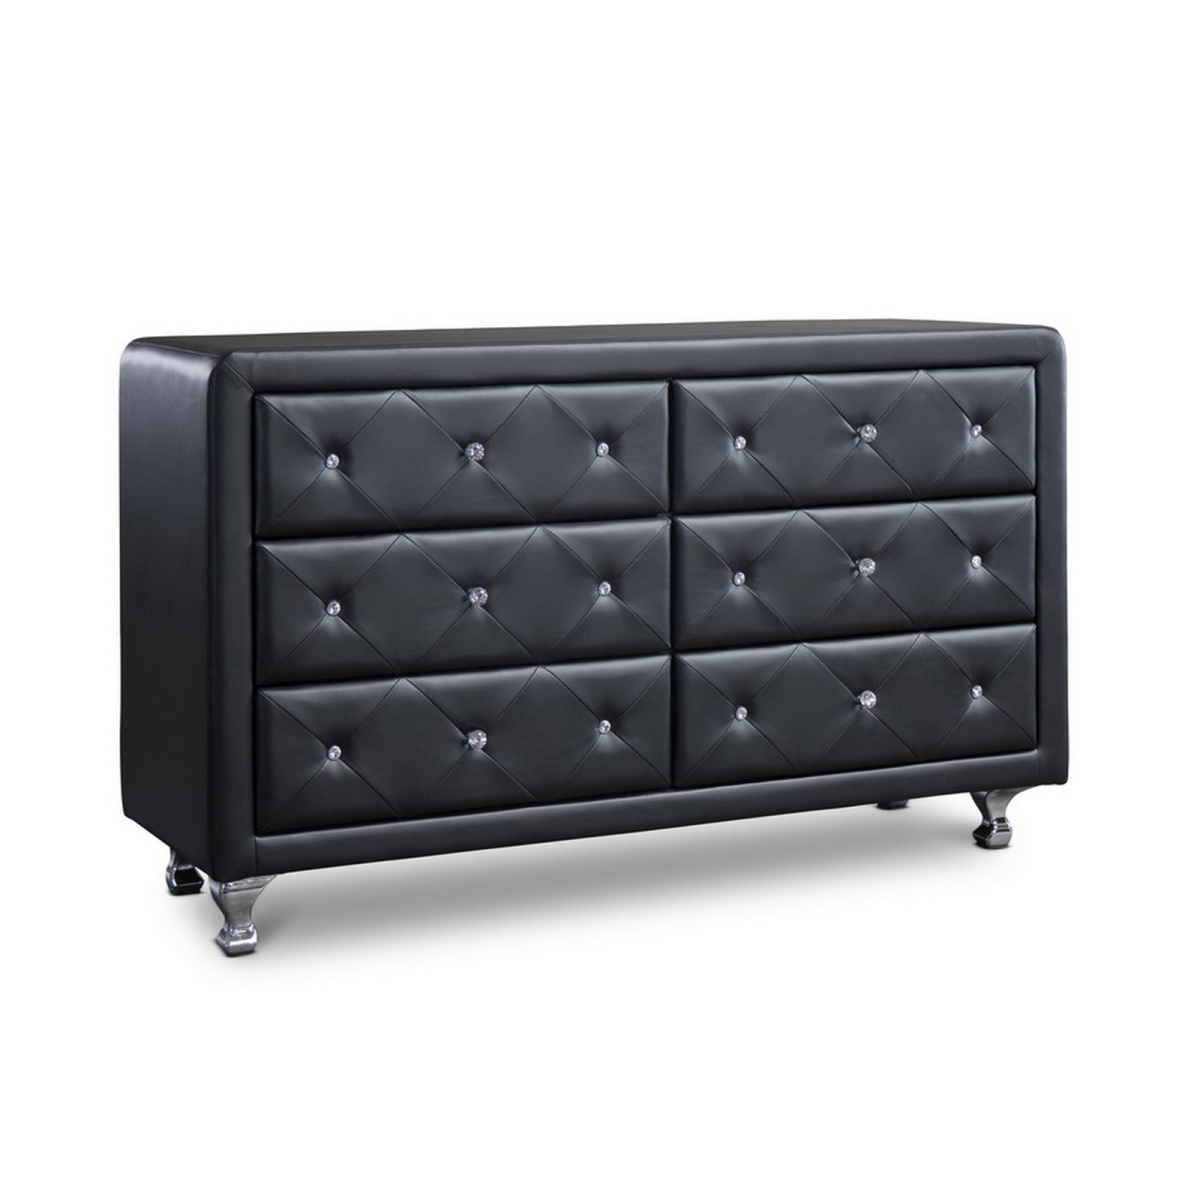 Urban Designs 370006 Luminescence Black Faux Leather Upholstered Dresser - 31.5 X 52.75 X 18.13 In.